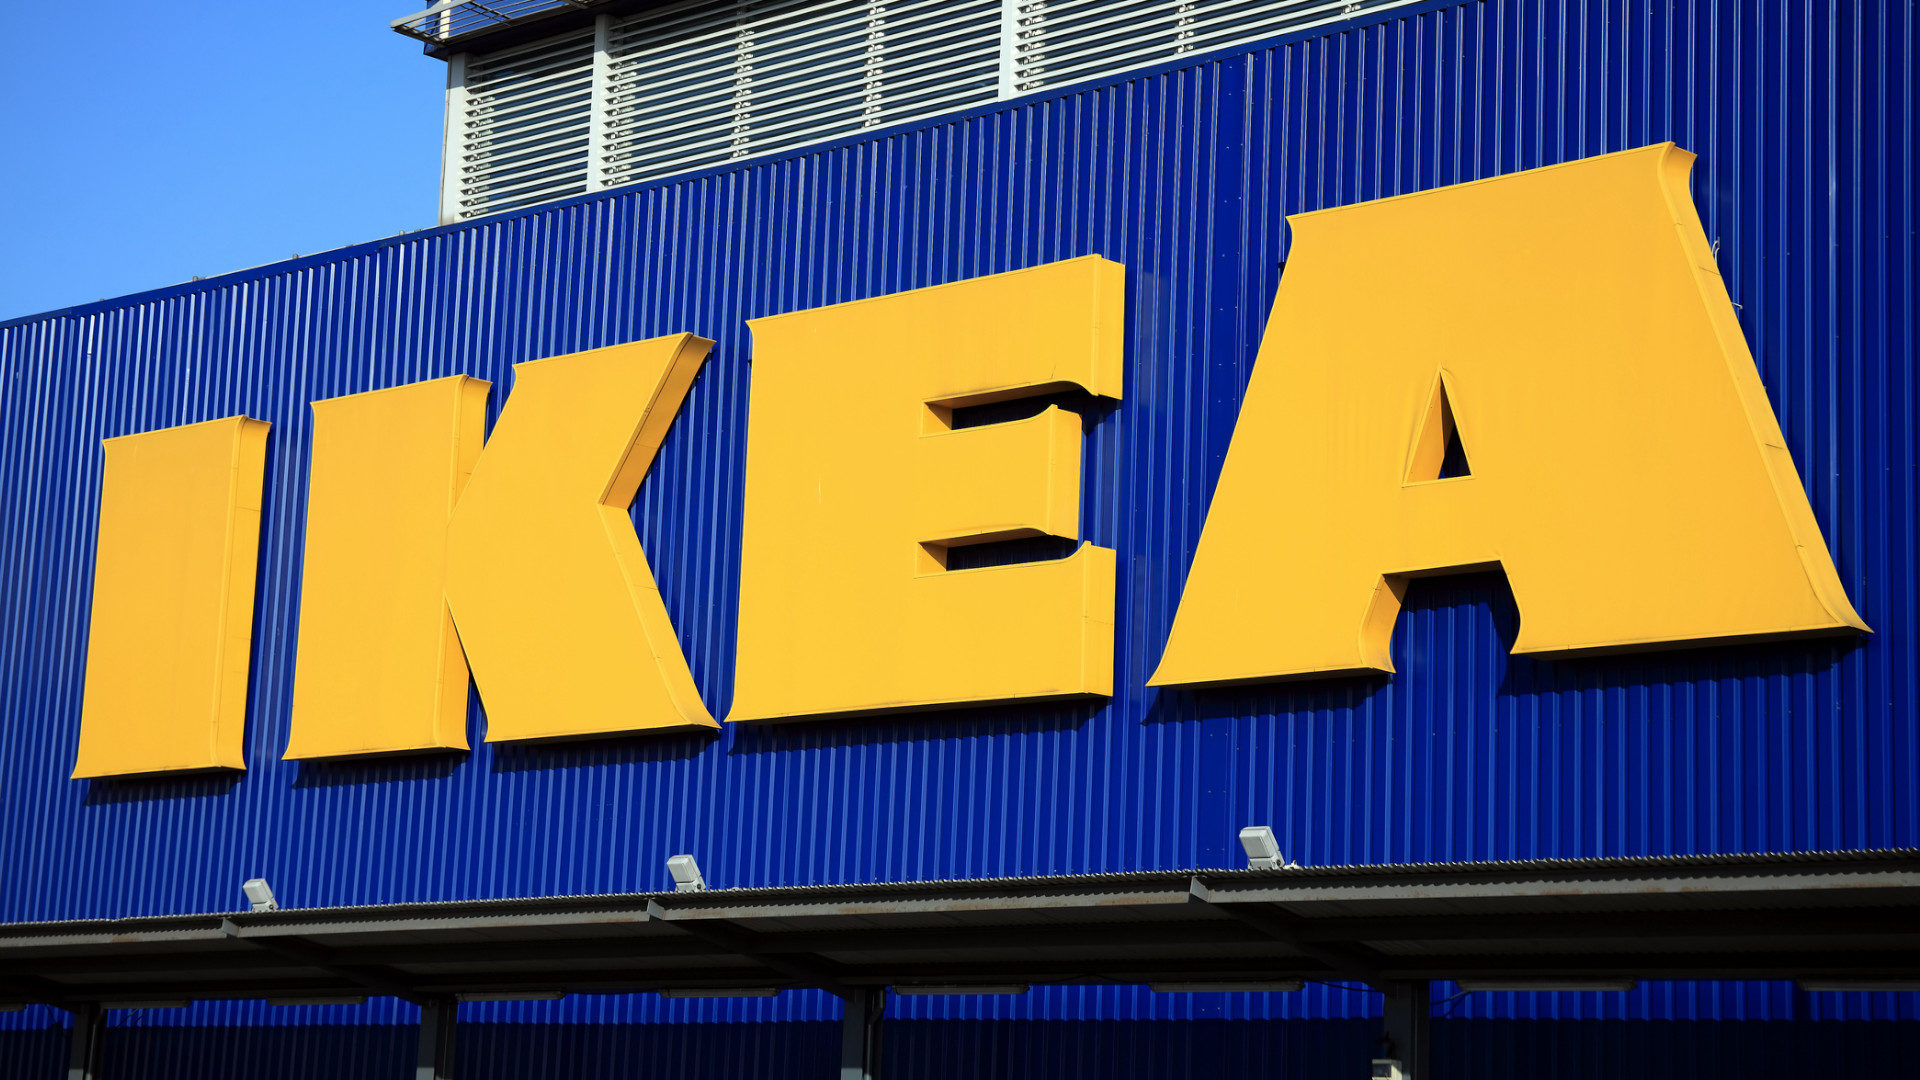 IKEA to fund €600m in climate-related projects